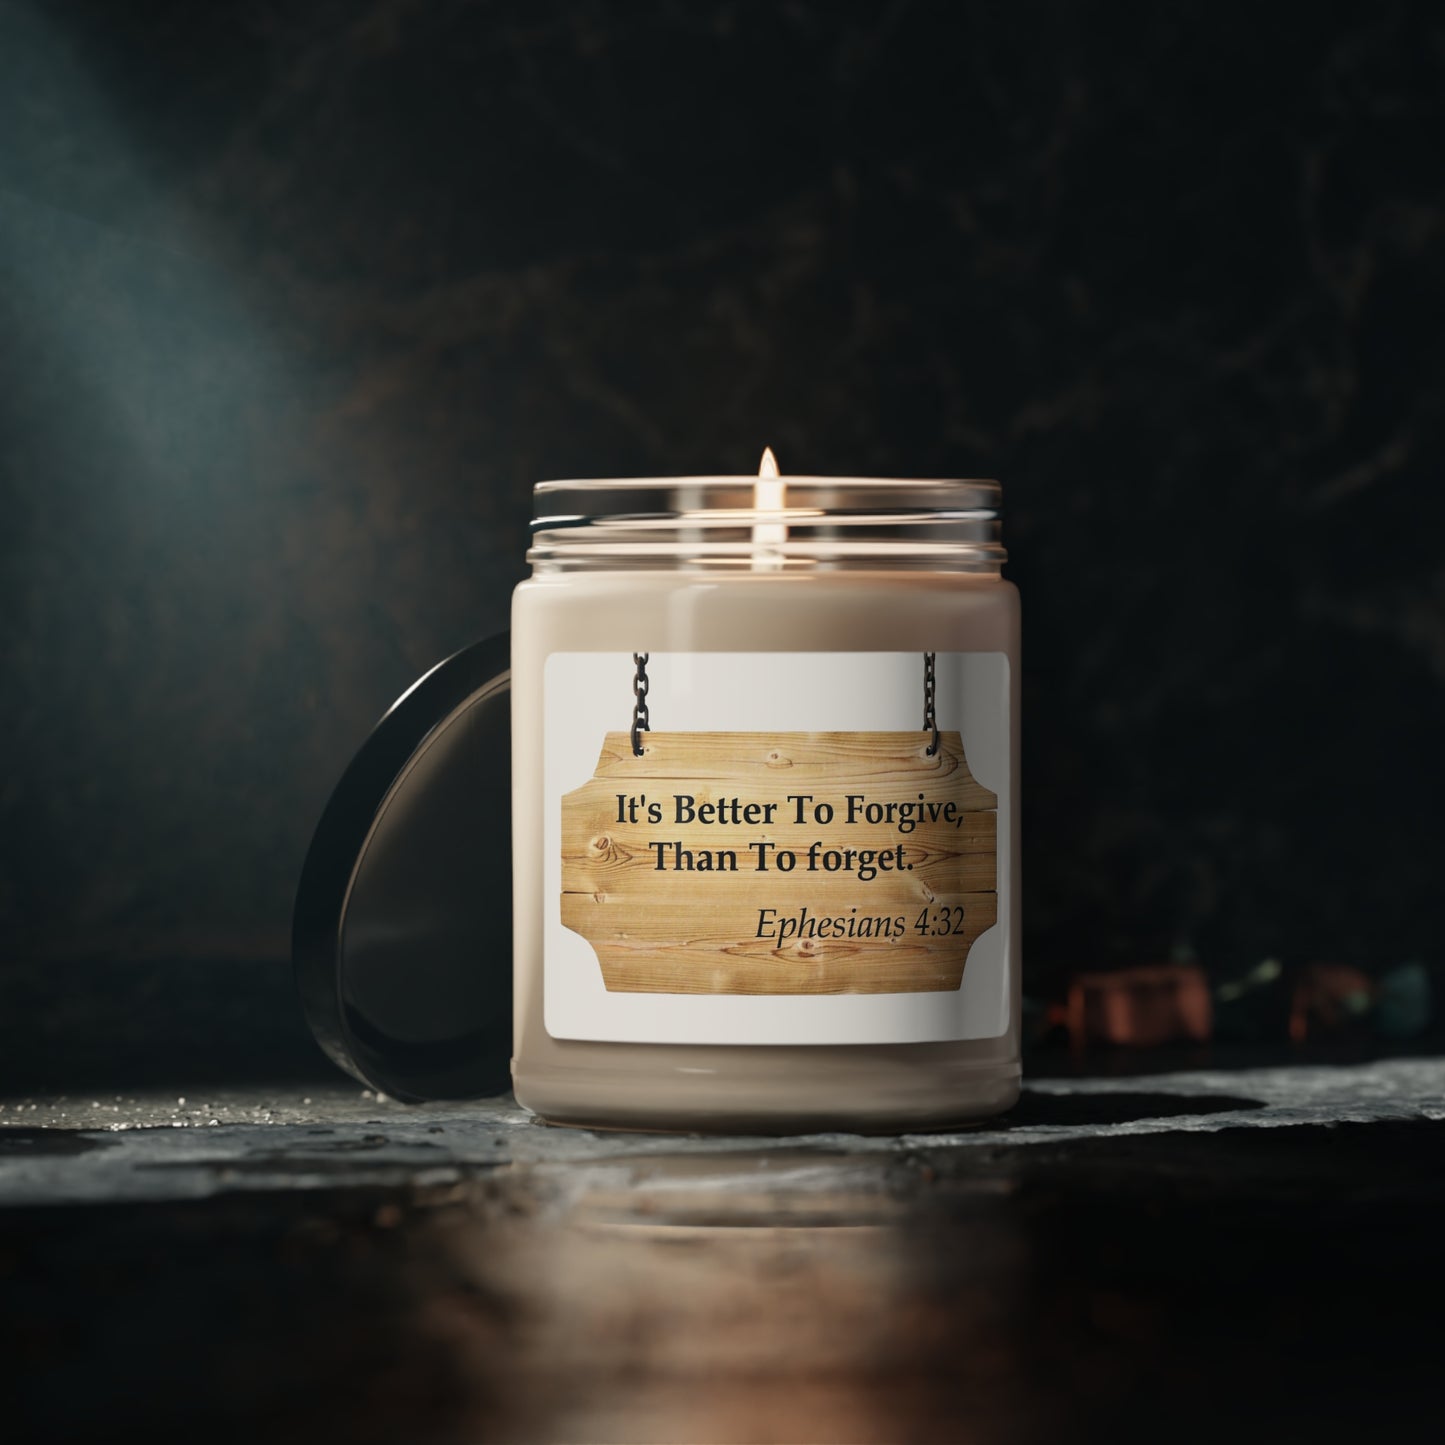 Candles Christian - 100% Soy Wax Scented Candle with Bible Verse | Assembled in the USA,Assembled in USA,Bio,Decor,Eco-friendly,Halloween,Holiday Picks,Home & Living,Home Decor,Made in the USA,Made in USA